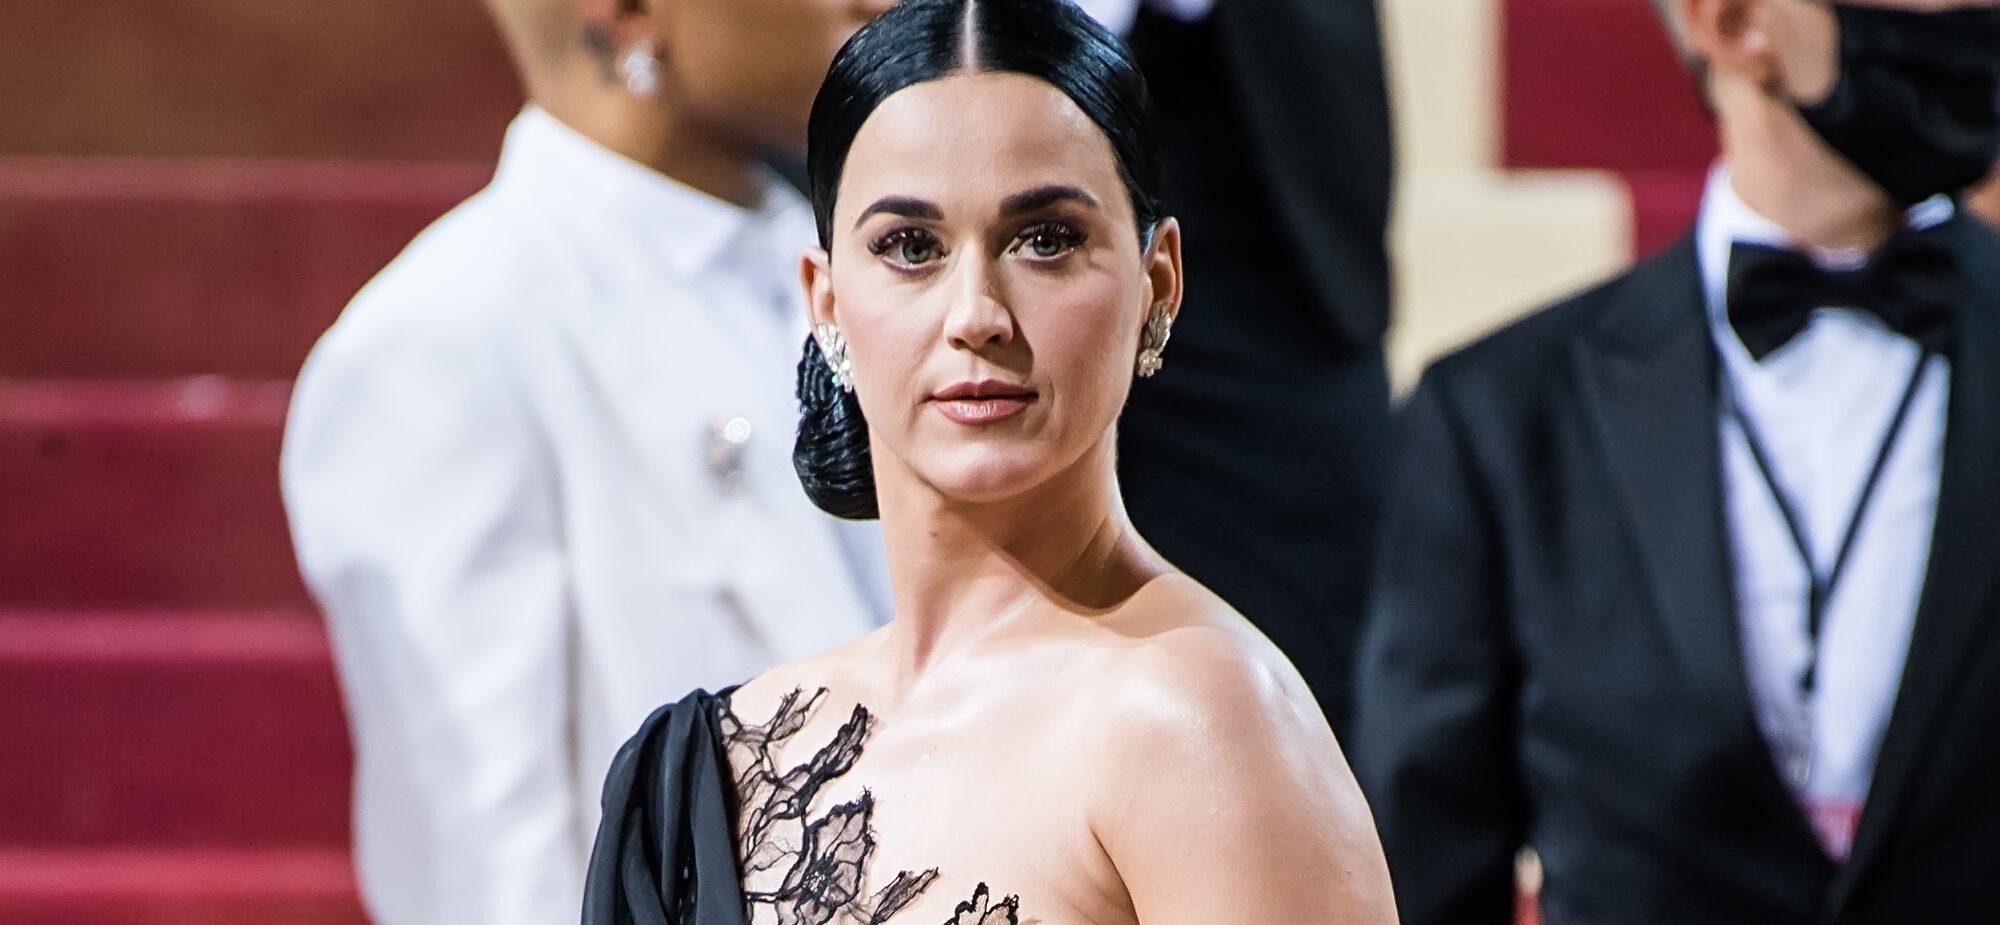 Katy Perry’s Real Estate Trial Takes Shocking, Unexpected Turn